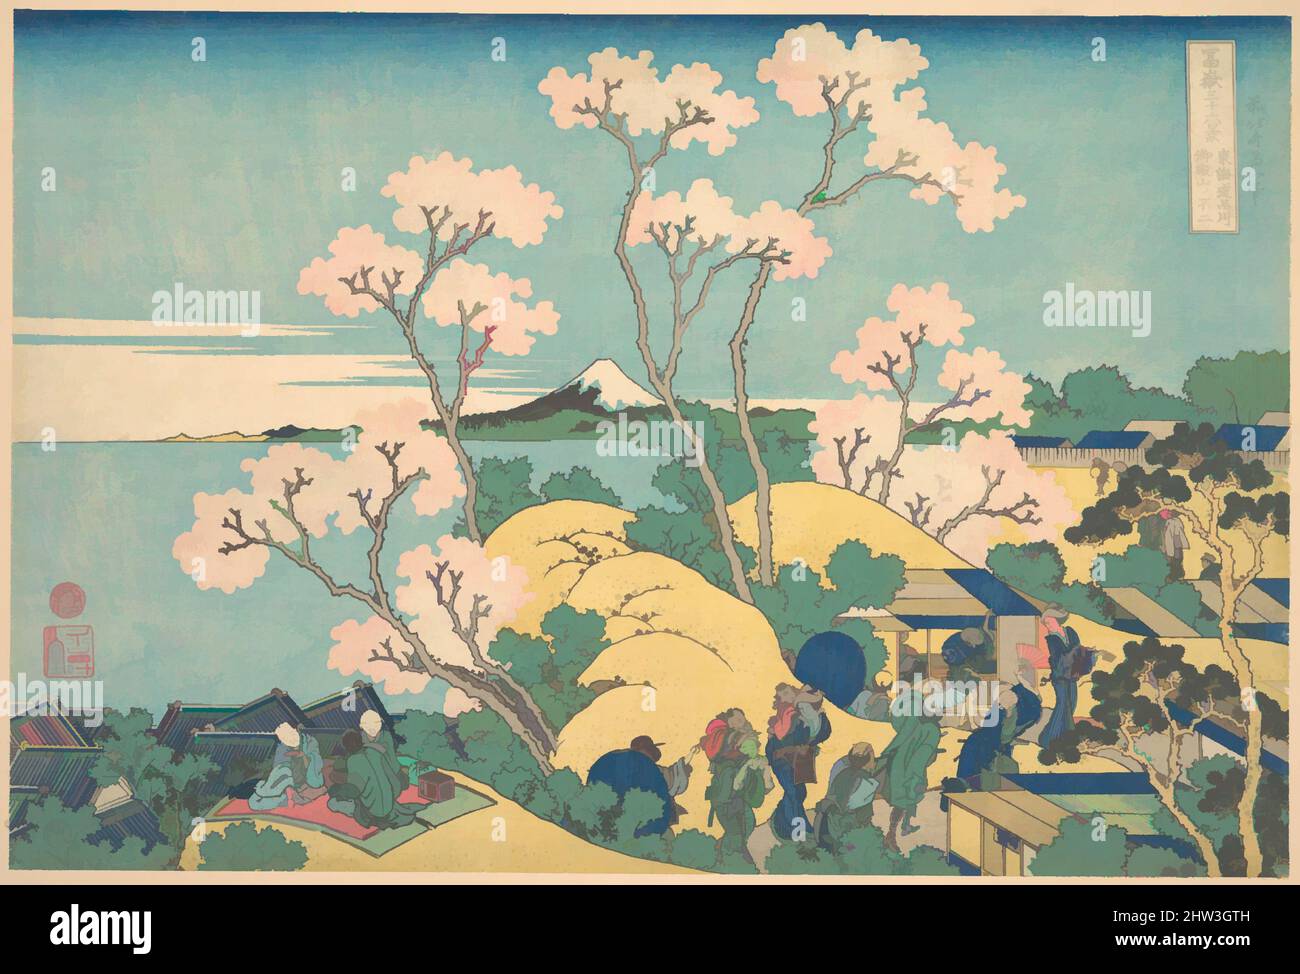 Art inspired by 冨嶽三十六景　東海道品川御殿山の不二, Fuji from Gotenyama on the Tōkaidō at Shinagawa (Tōkaidō Shinagawa Gotenyama no Fuji), from the series Thirty-six Views of Mount Fuji (Fugaku sanjūrokkei), Edo period (1615–1868), ca. 1830–32, Japan, Polychrome woodblock print; ink and color on paper, Classic works modernized by Artotop with a splash of modernity. Shapes, color and value, eye-catching visual impact on art. Emotions through freedom of artworks in a contemporary way. A timeless message pursuing a wildly creative new direction. Artists turning to the digital medium and creating the Artotop NFT Stock Photo